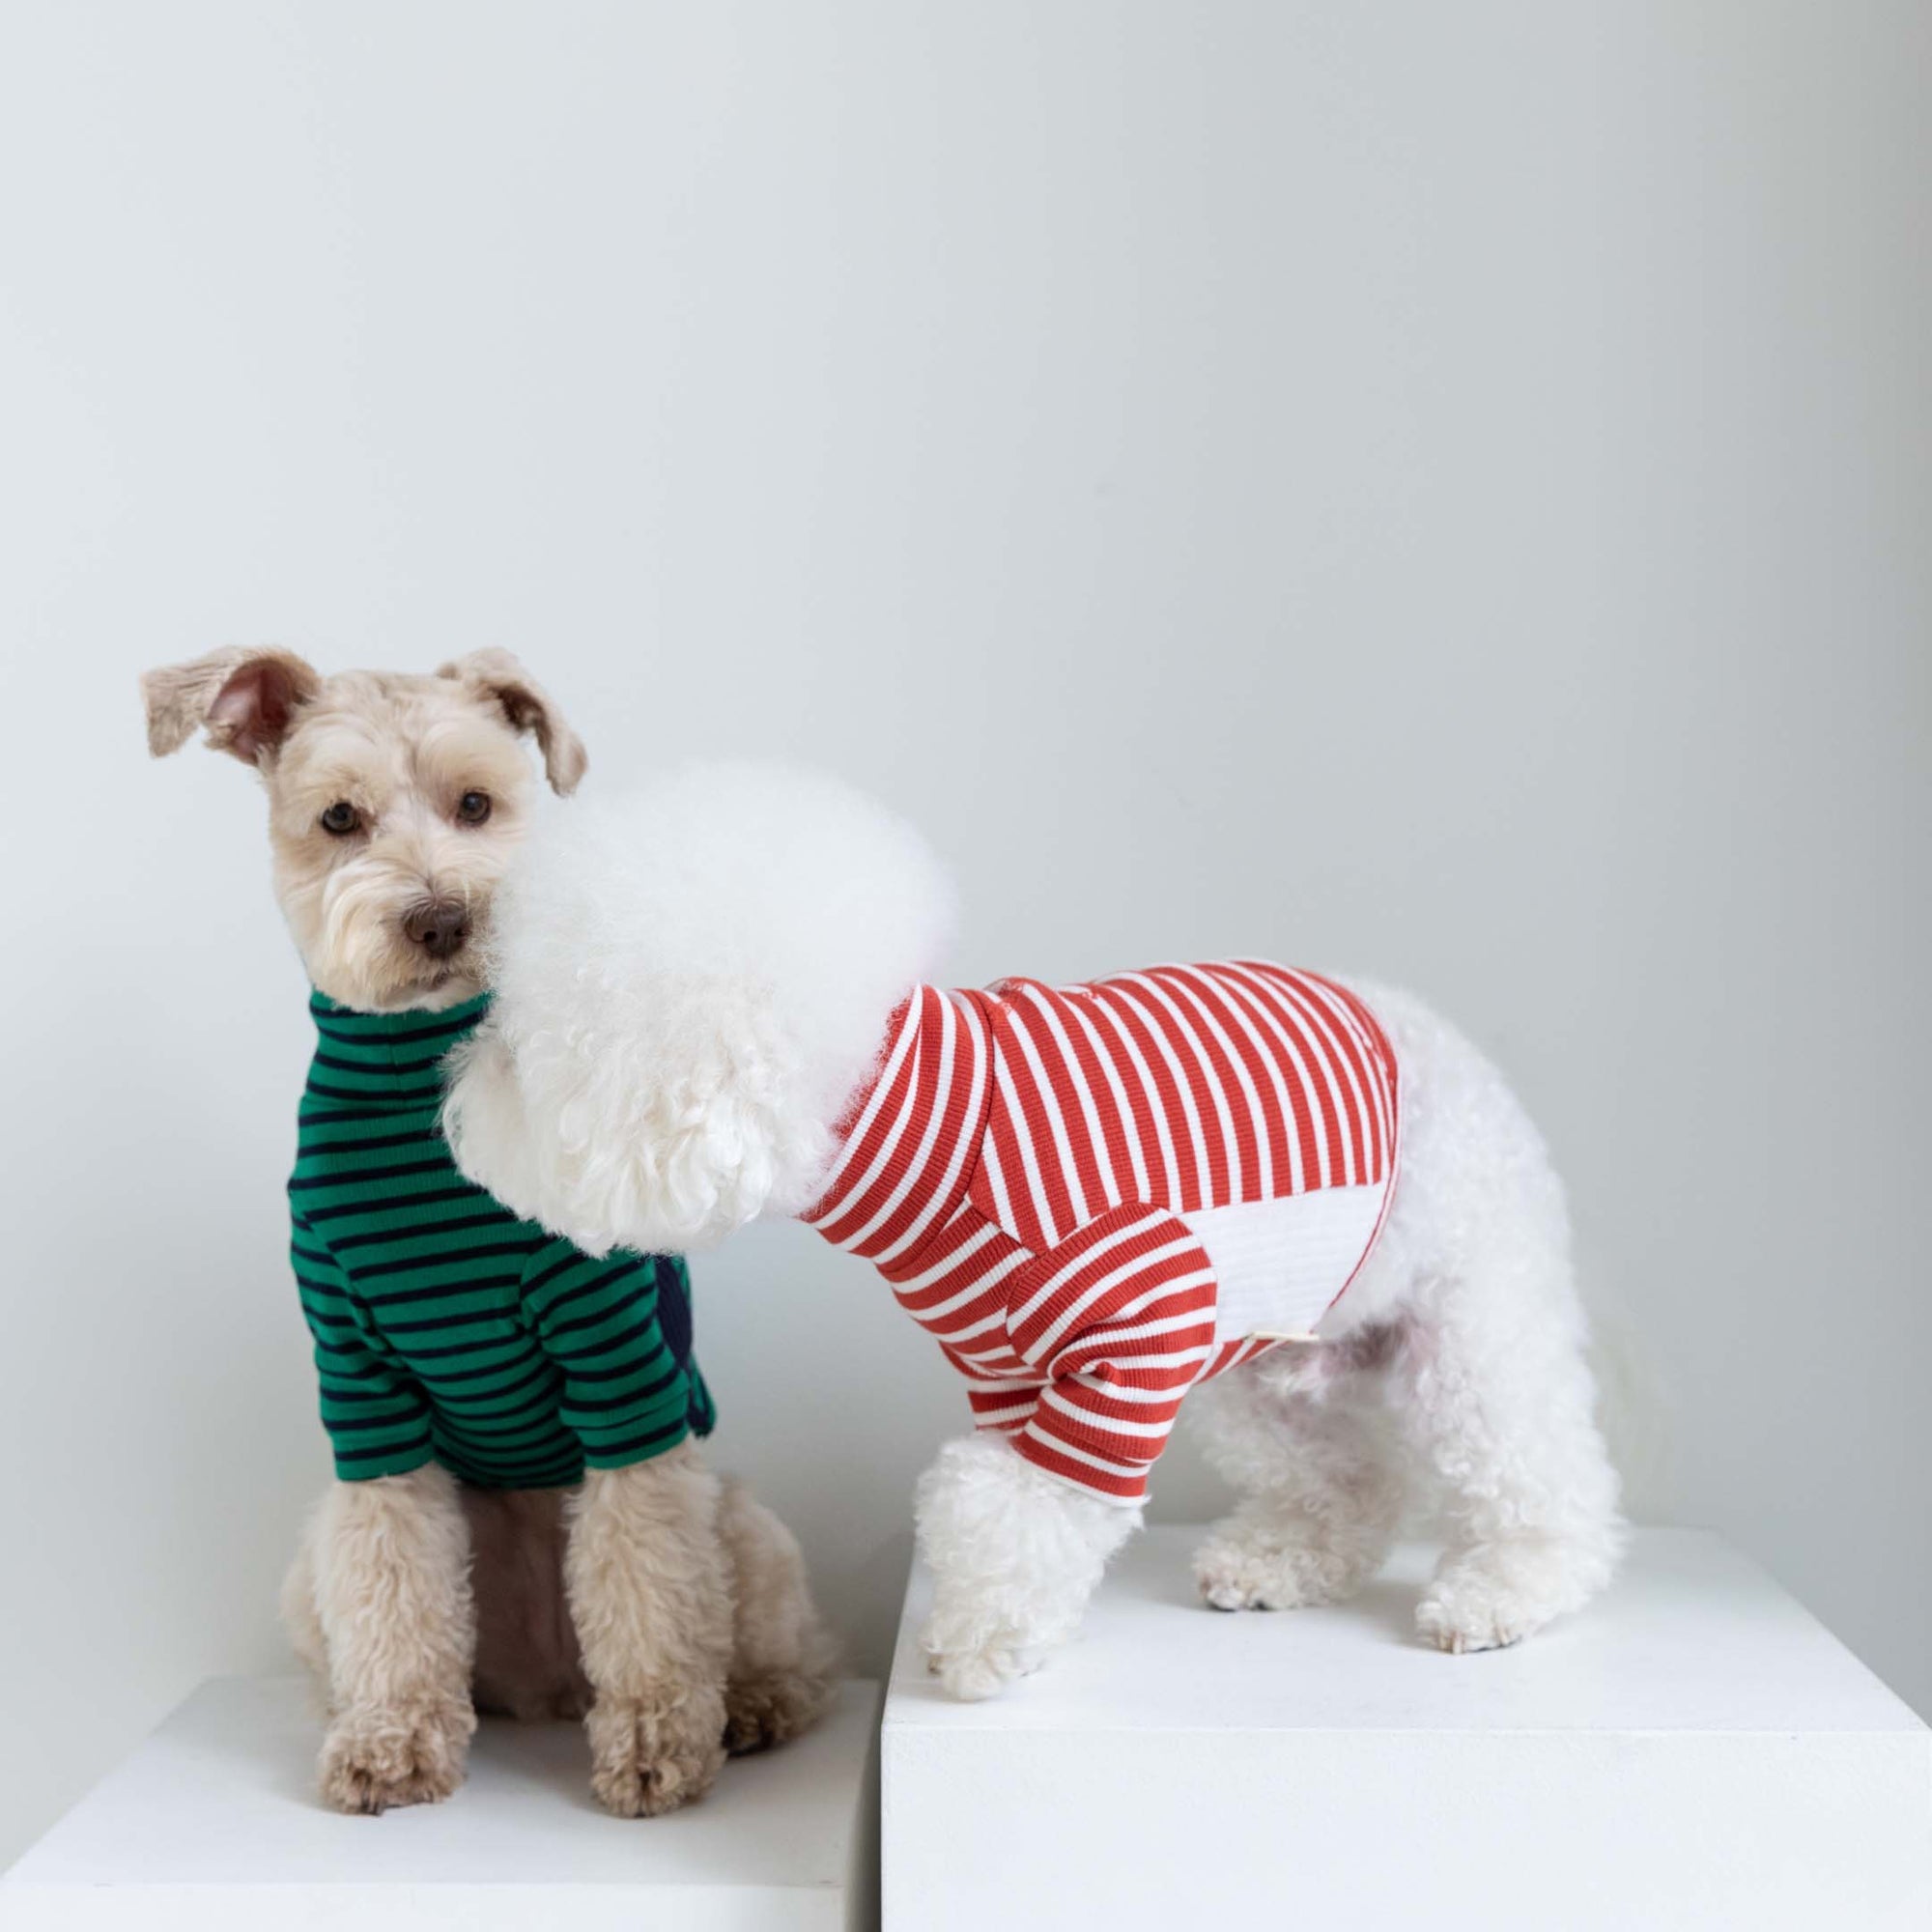 Two dogs in striped shirts: a Schnauzer in green and navy, and a Bichon Frise in red and white, on a playful encounter.